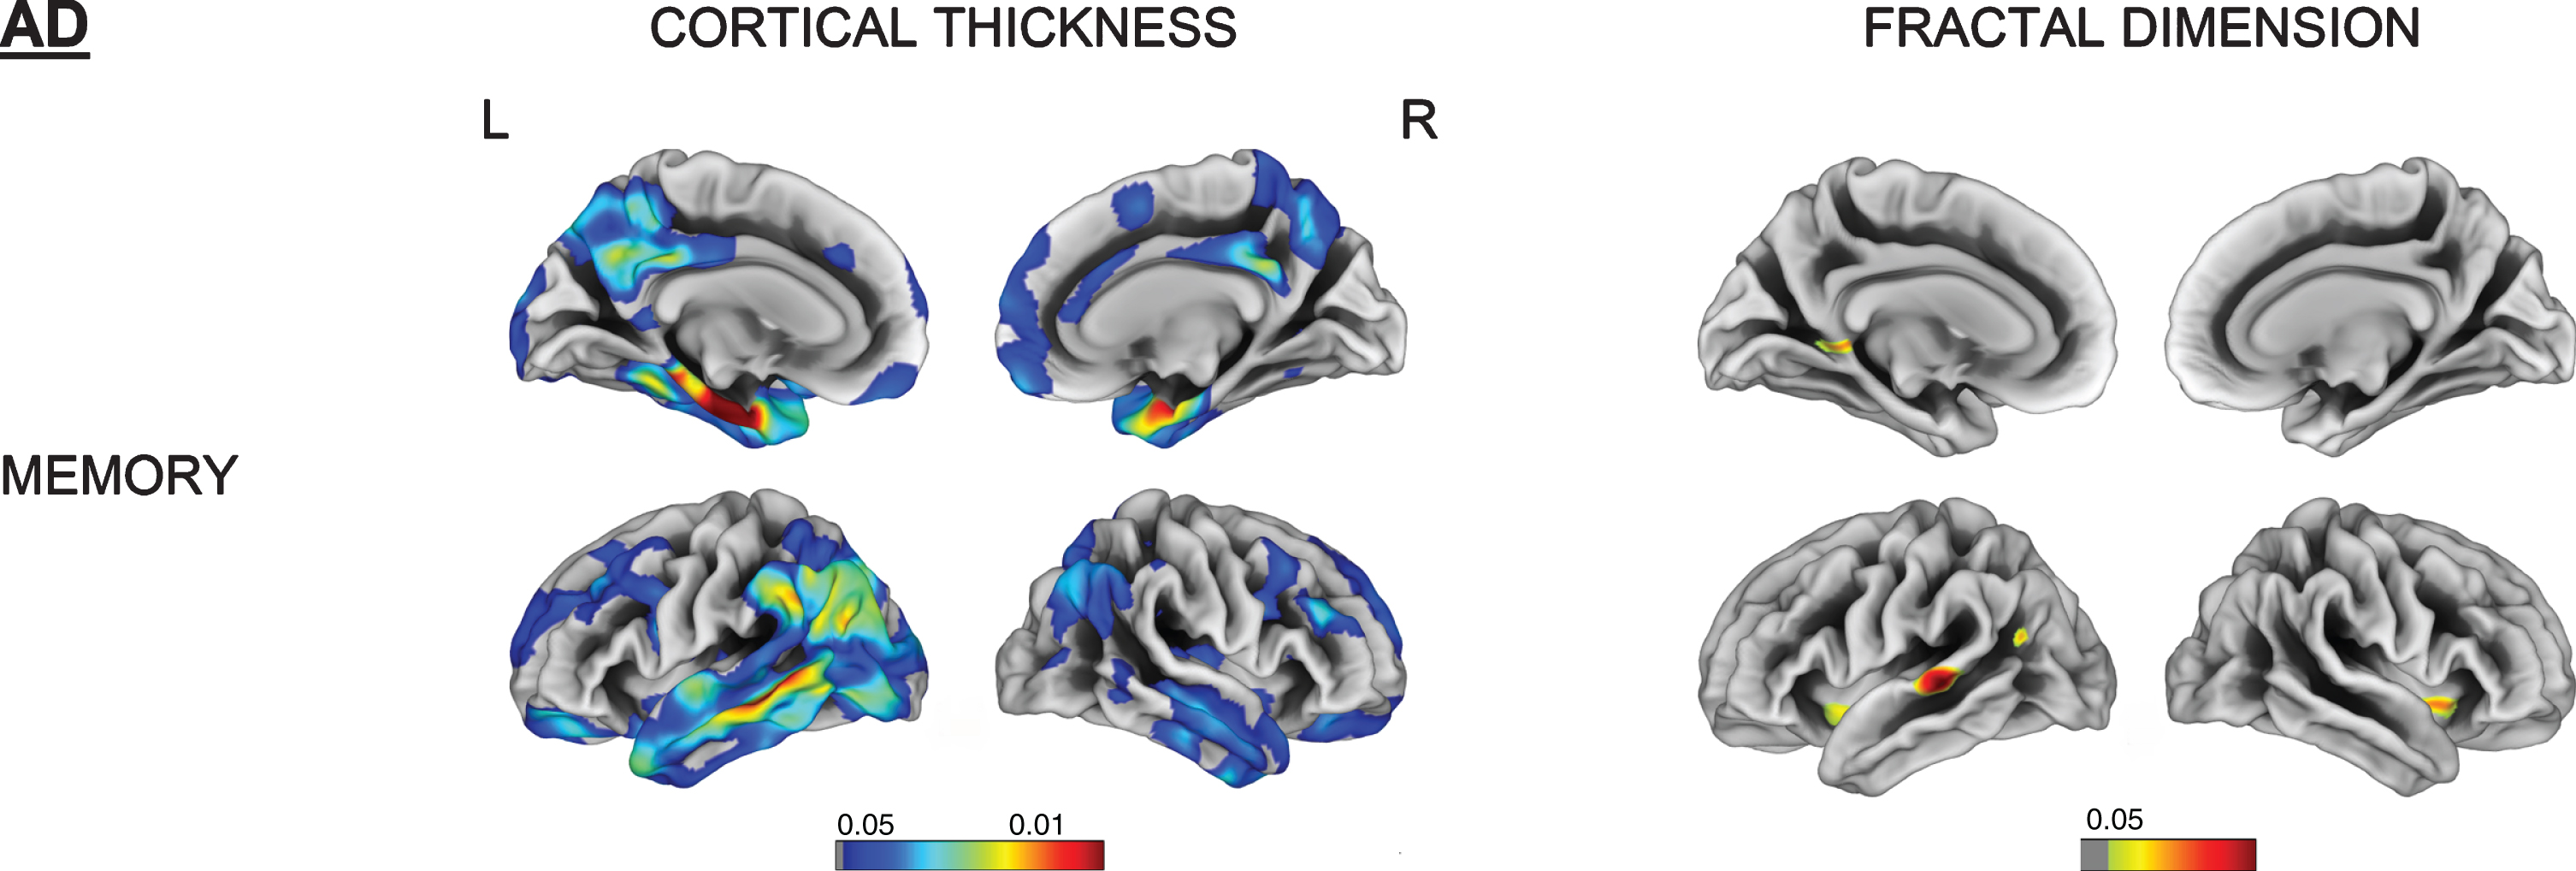 Vertex-wise cortical thickness and fractal dimension correlate of memory impairment for the AD group (FDR-corrected p < 0.05). L, left; R, right.